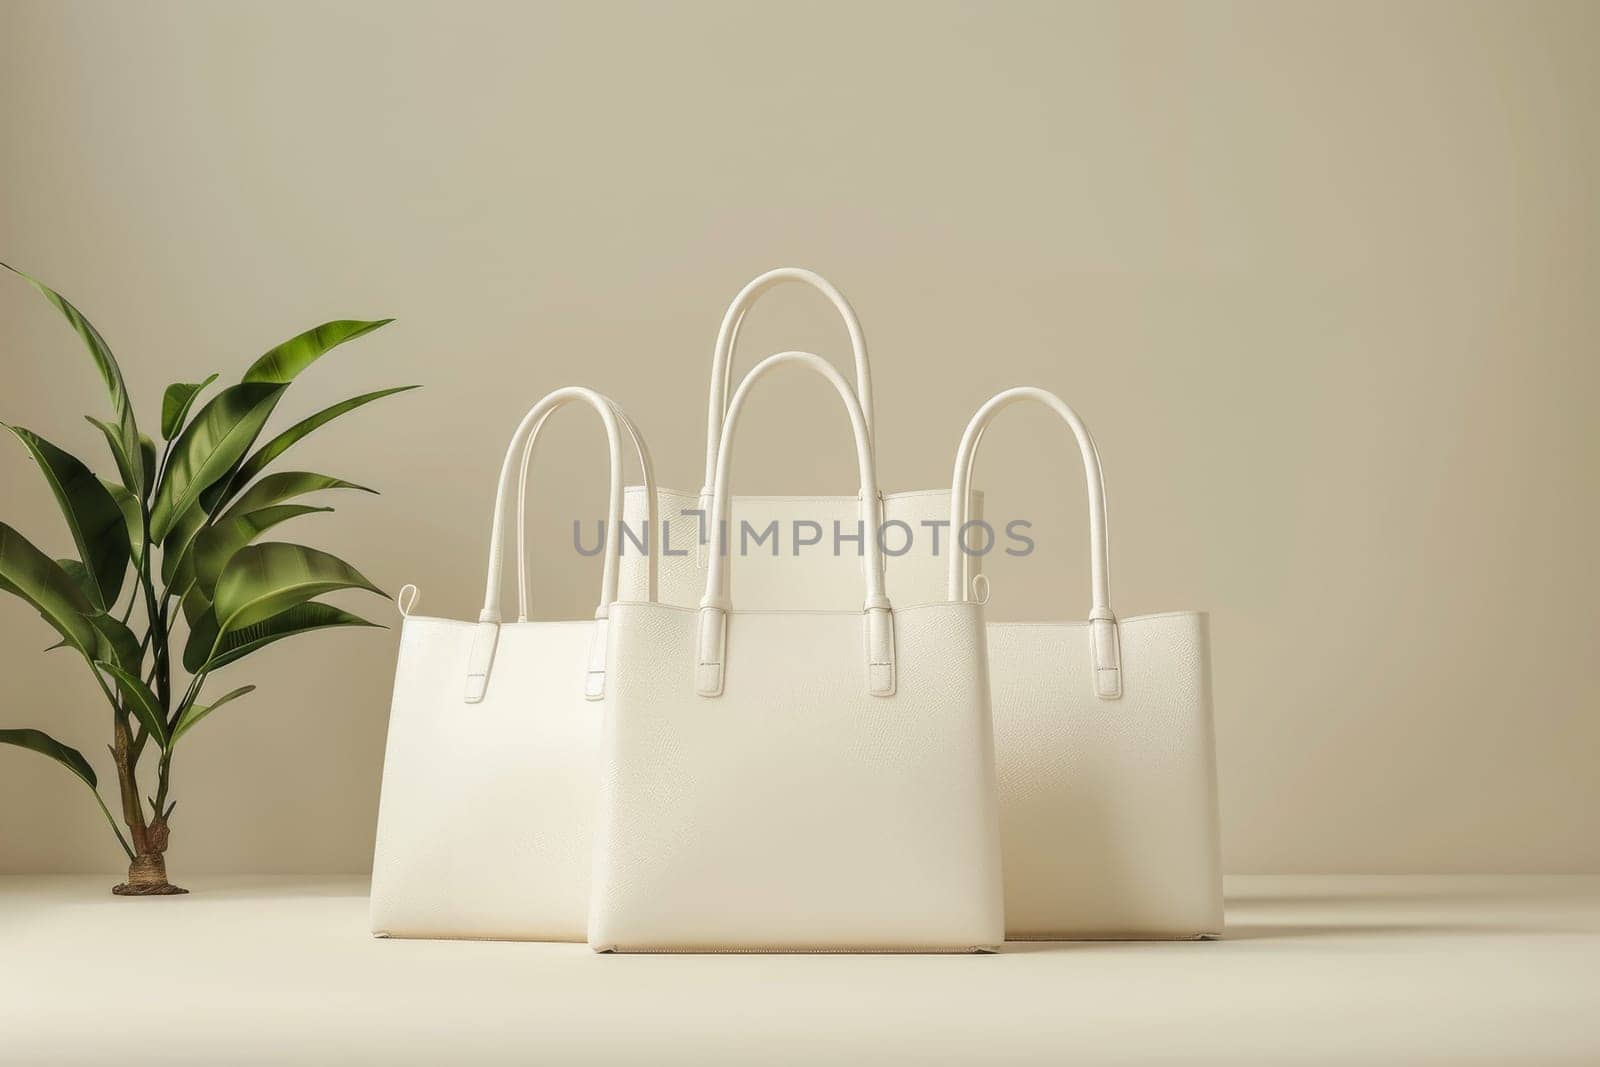 Mockup Luxury Women's handbags made by leather by itchaznong